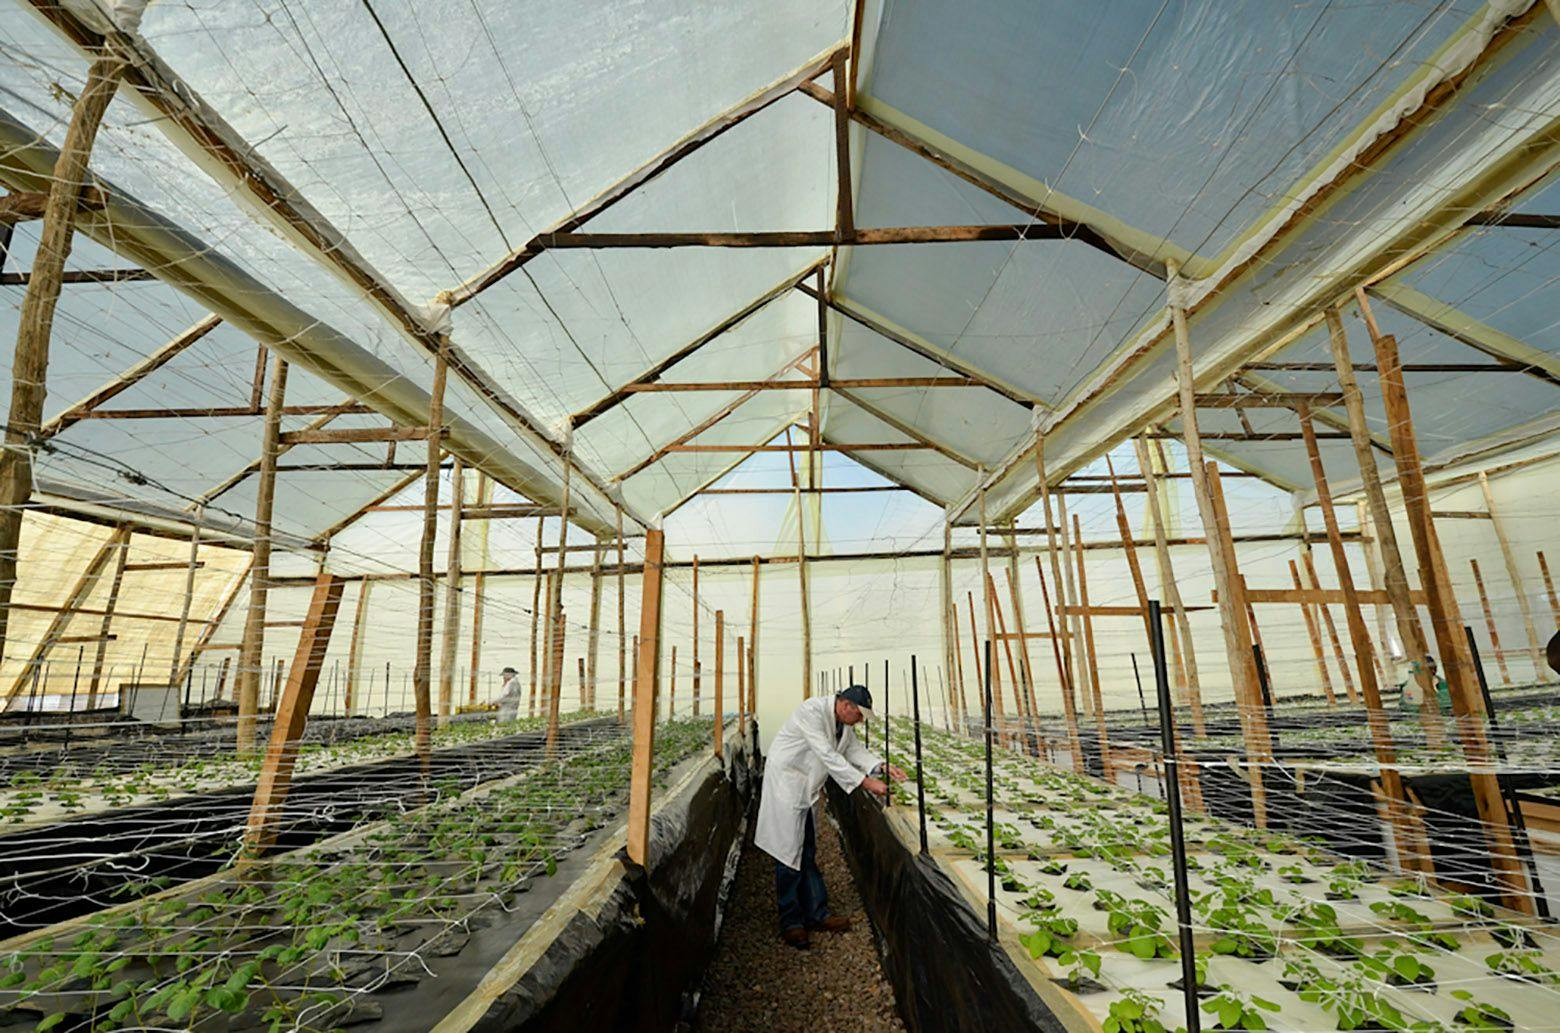 Greenhouse with people inspecting crops